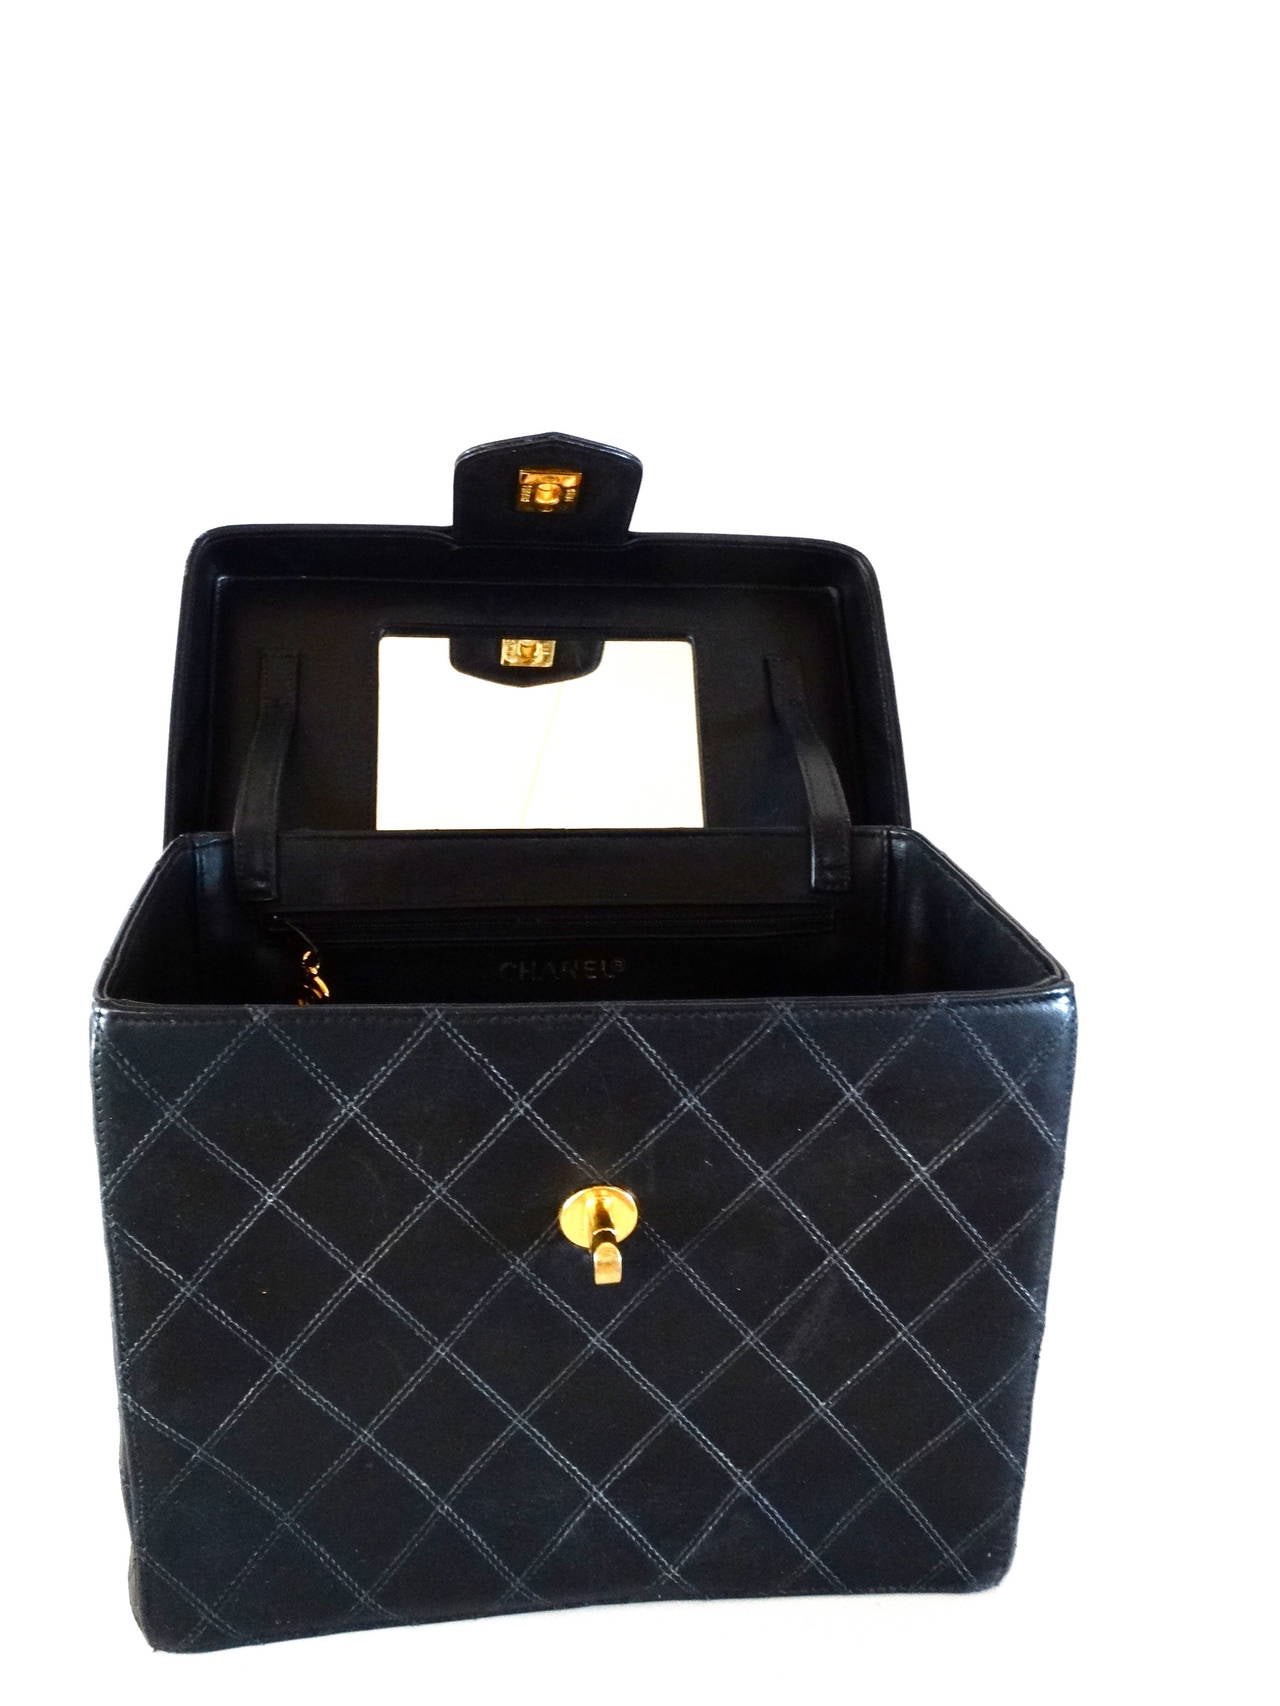 Rare 1980's CHANEL  caviar 2 way vanity bag makeup box/travel bag with inside mirror each inside wall has a zipper pocket with a CC logo zipper pull. Marked made in Italy in good condition. A great collectors piece.

Measurements:
9